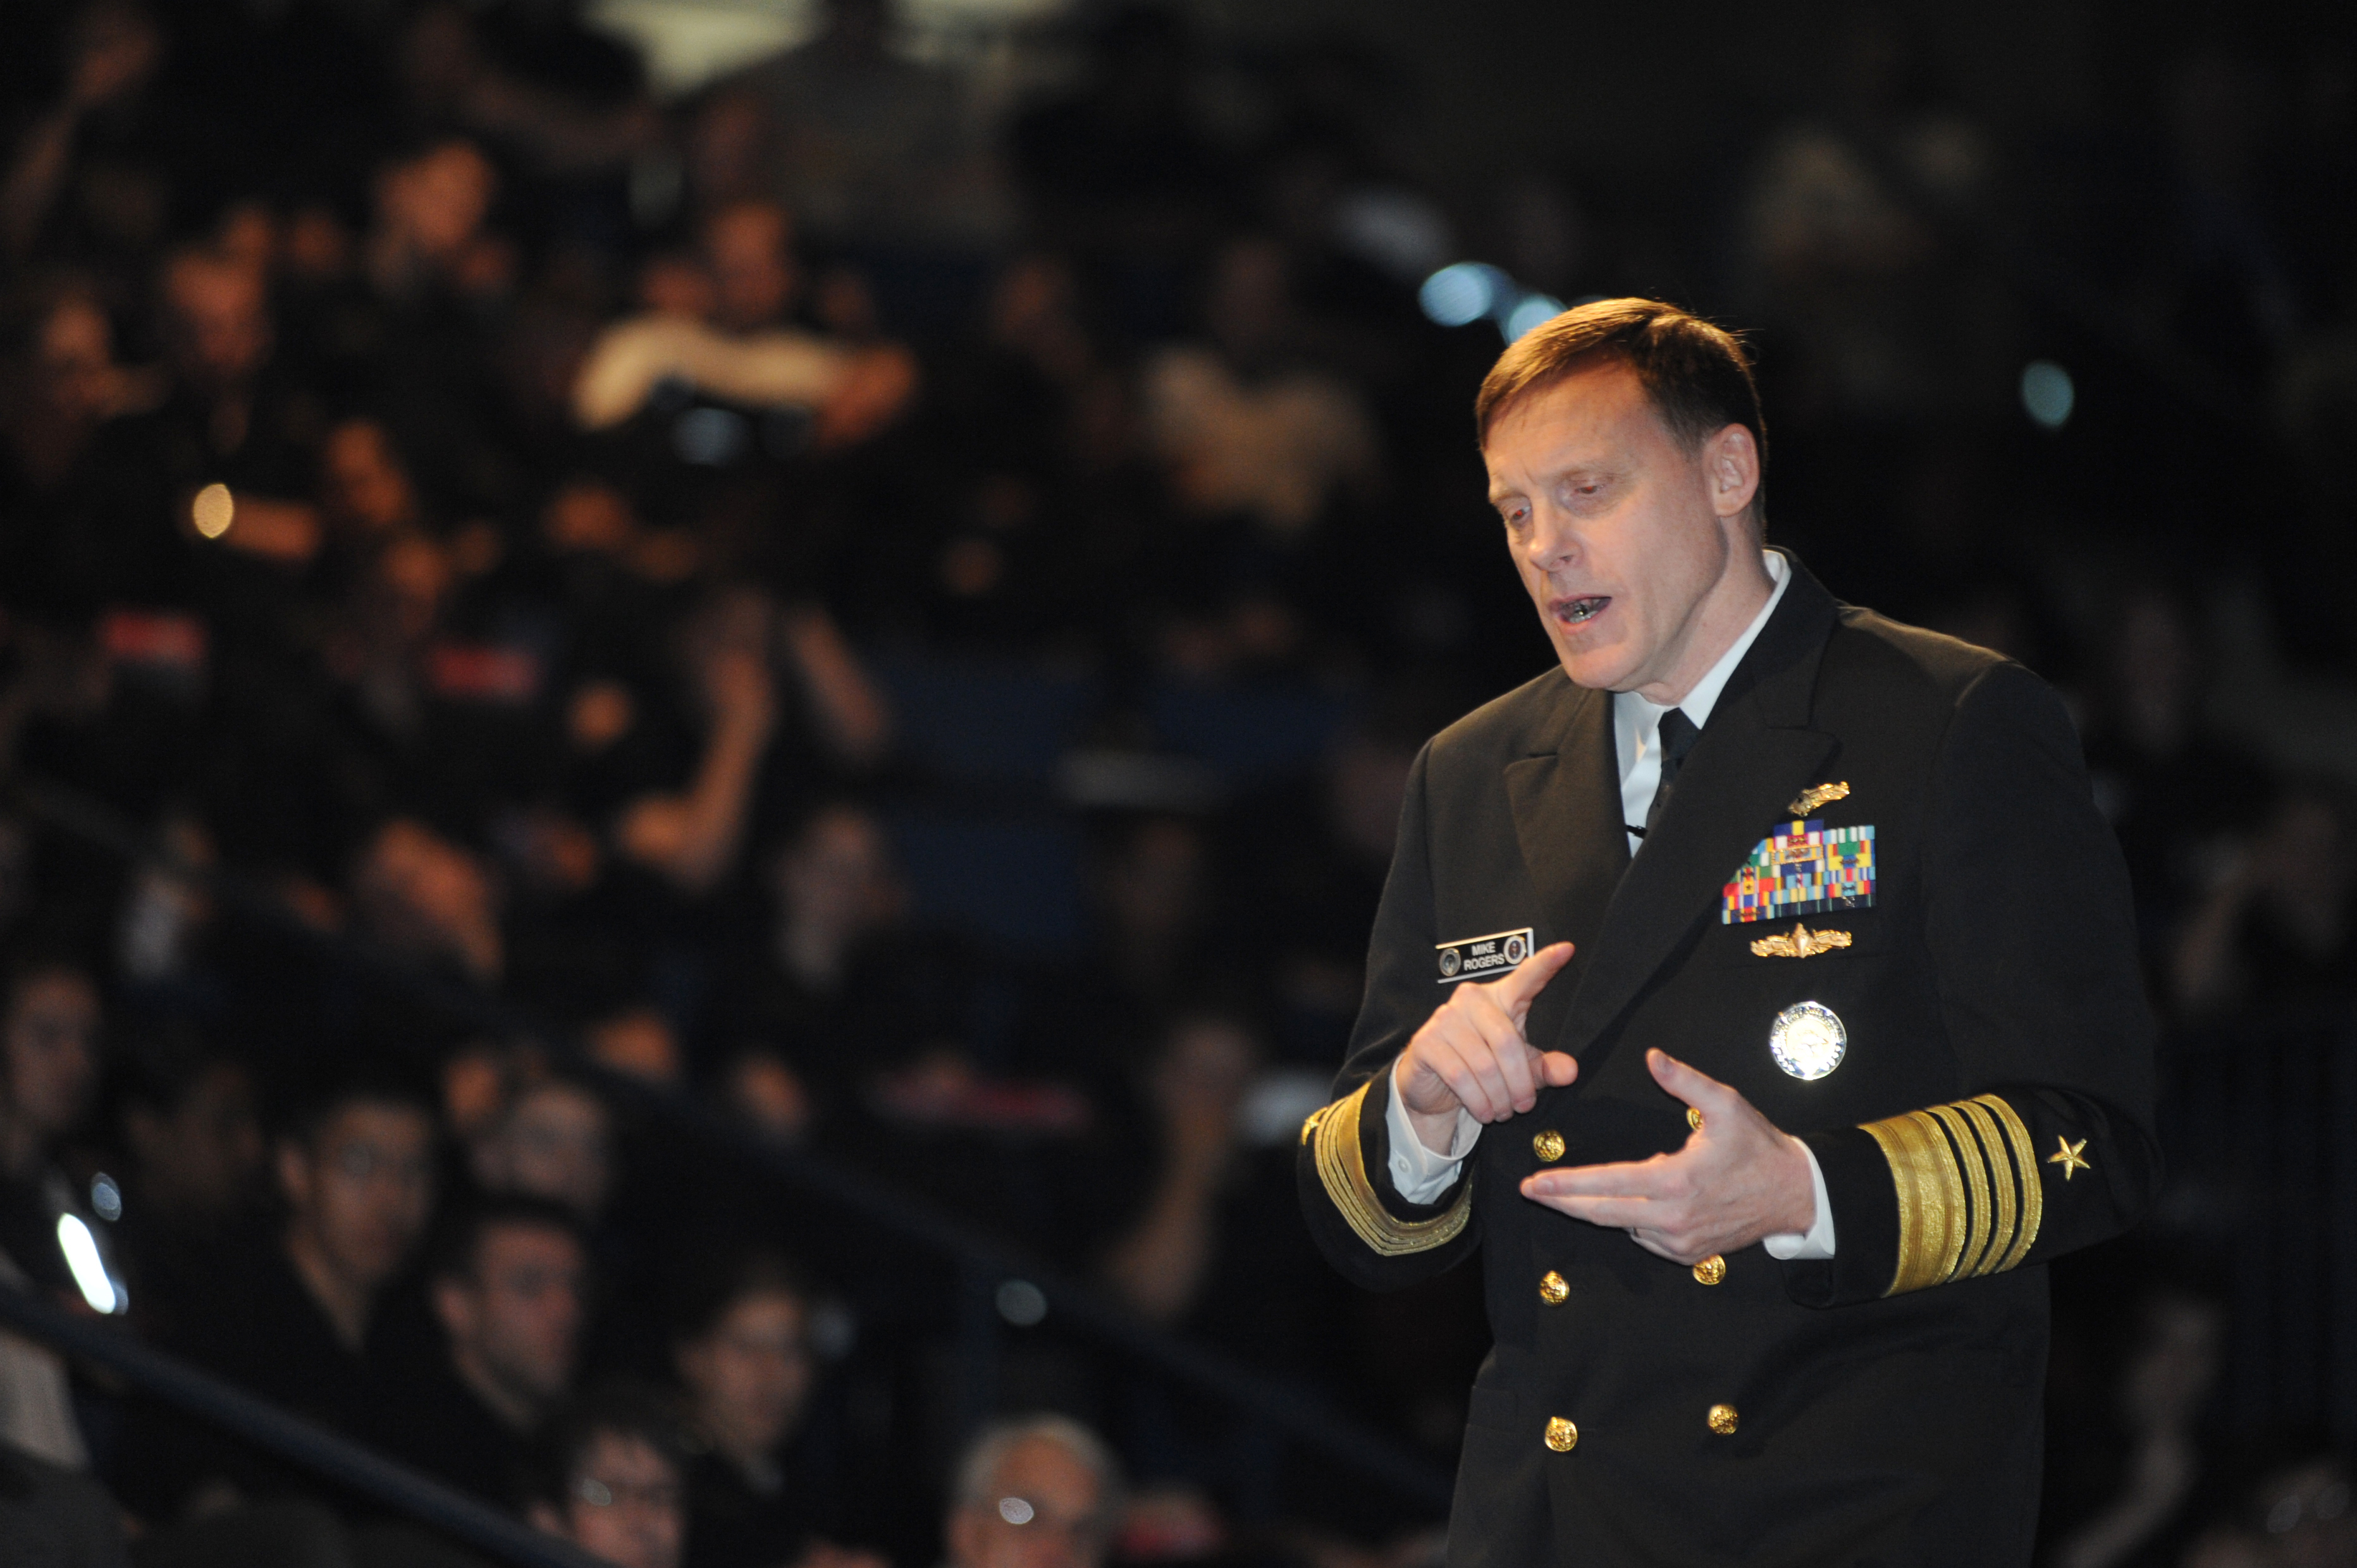 Adm. Michael S. Rogers, commander, U.S. Cyber Command (USCYBERCOM) and head of the National Security Agency. US Navy Photo